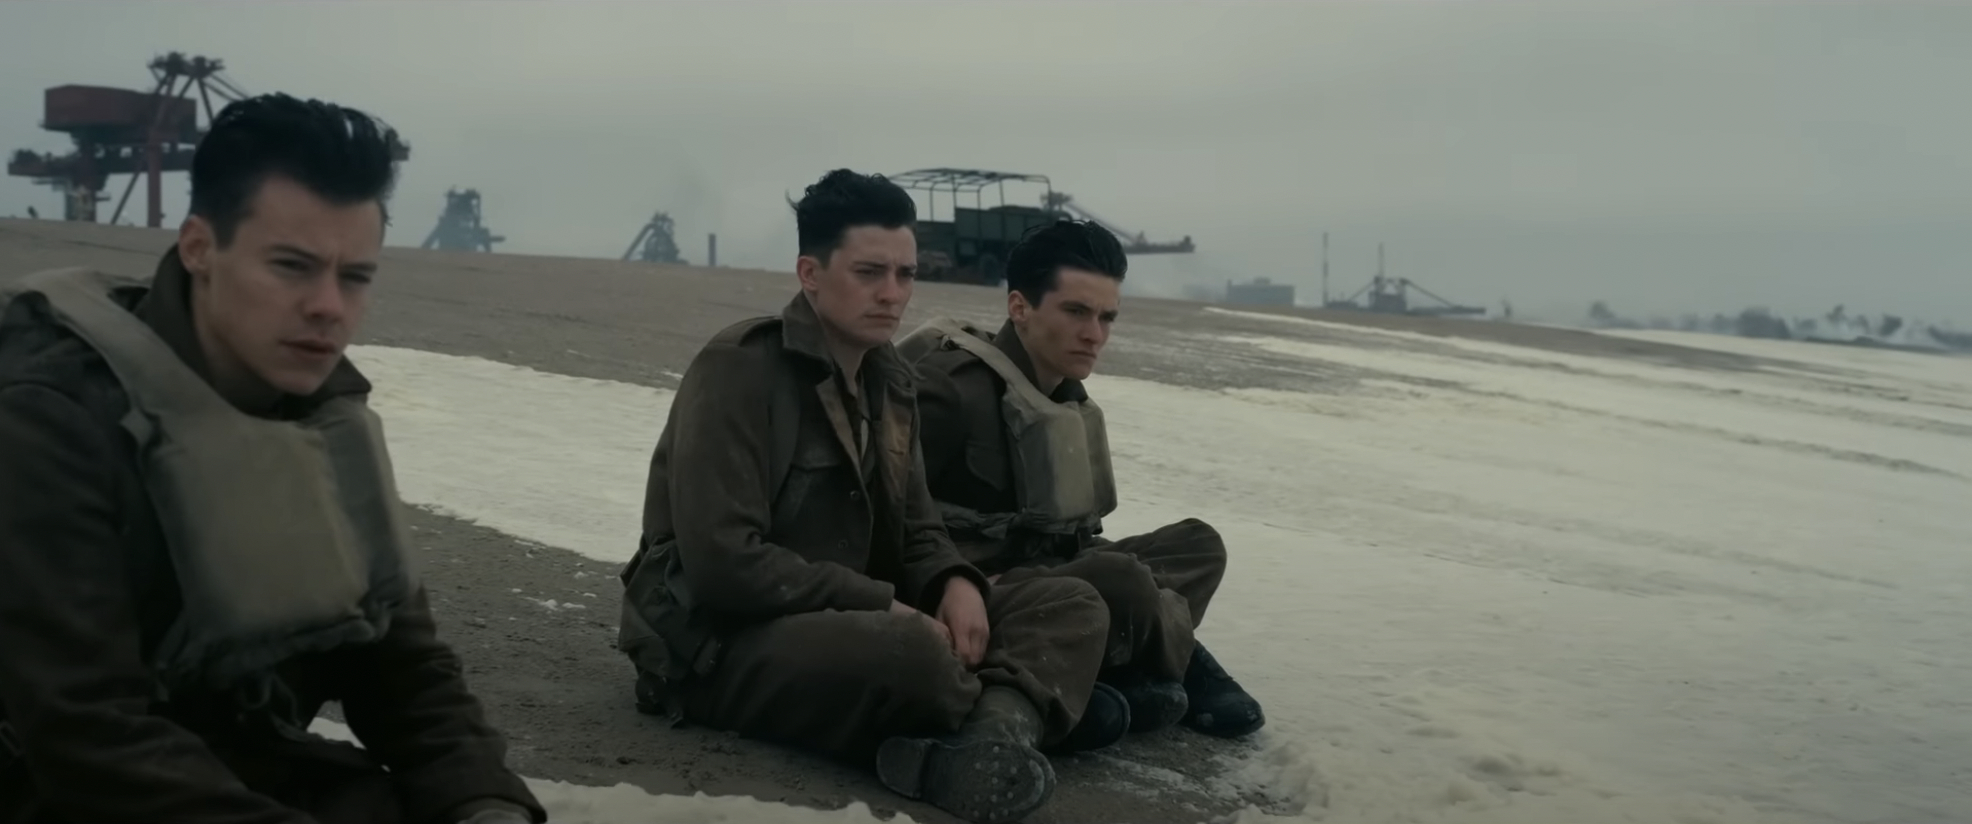 three soldiers sit on a beach